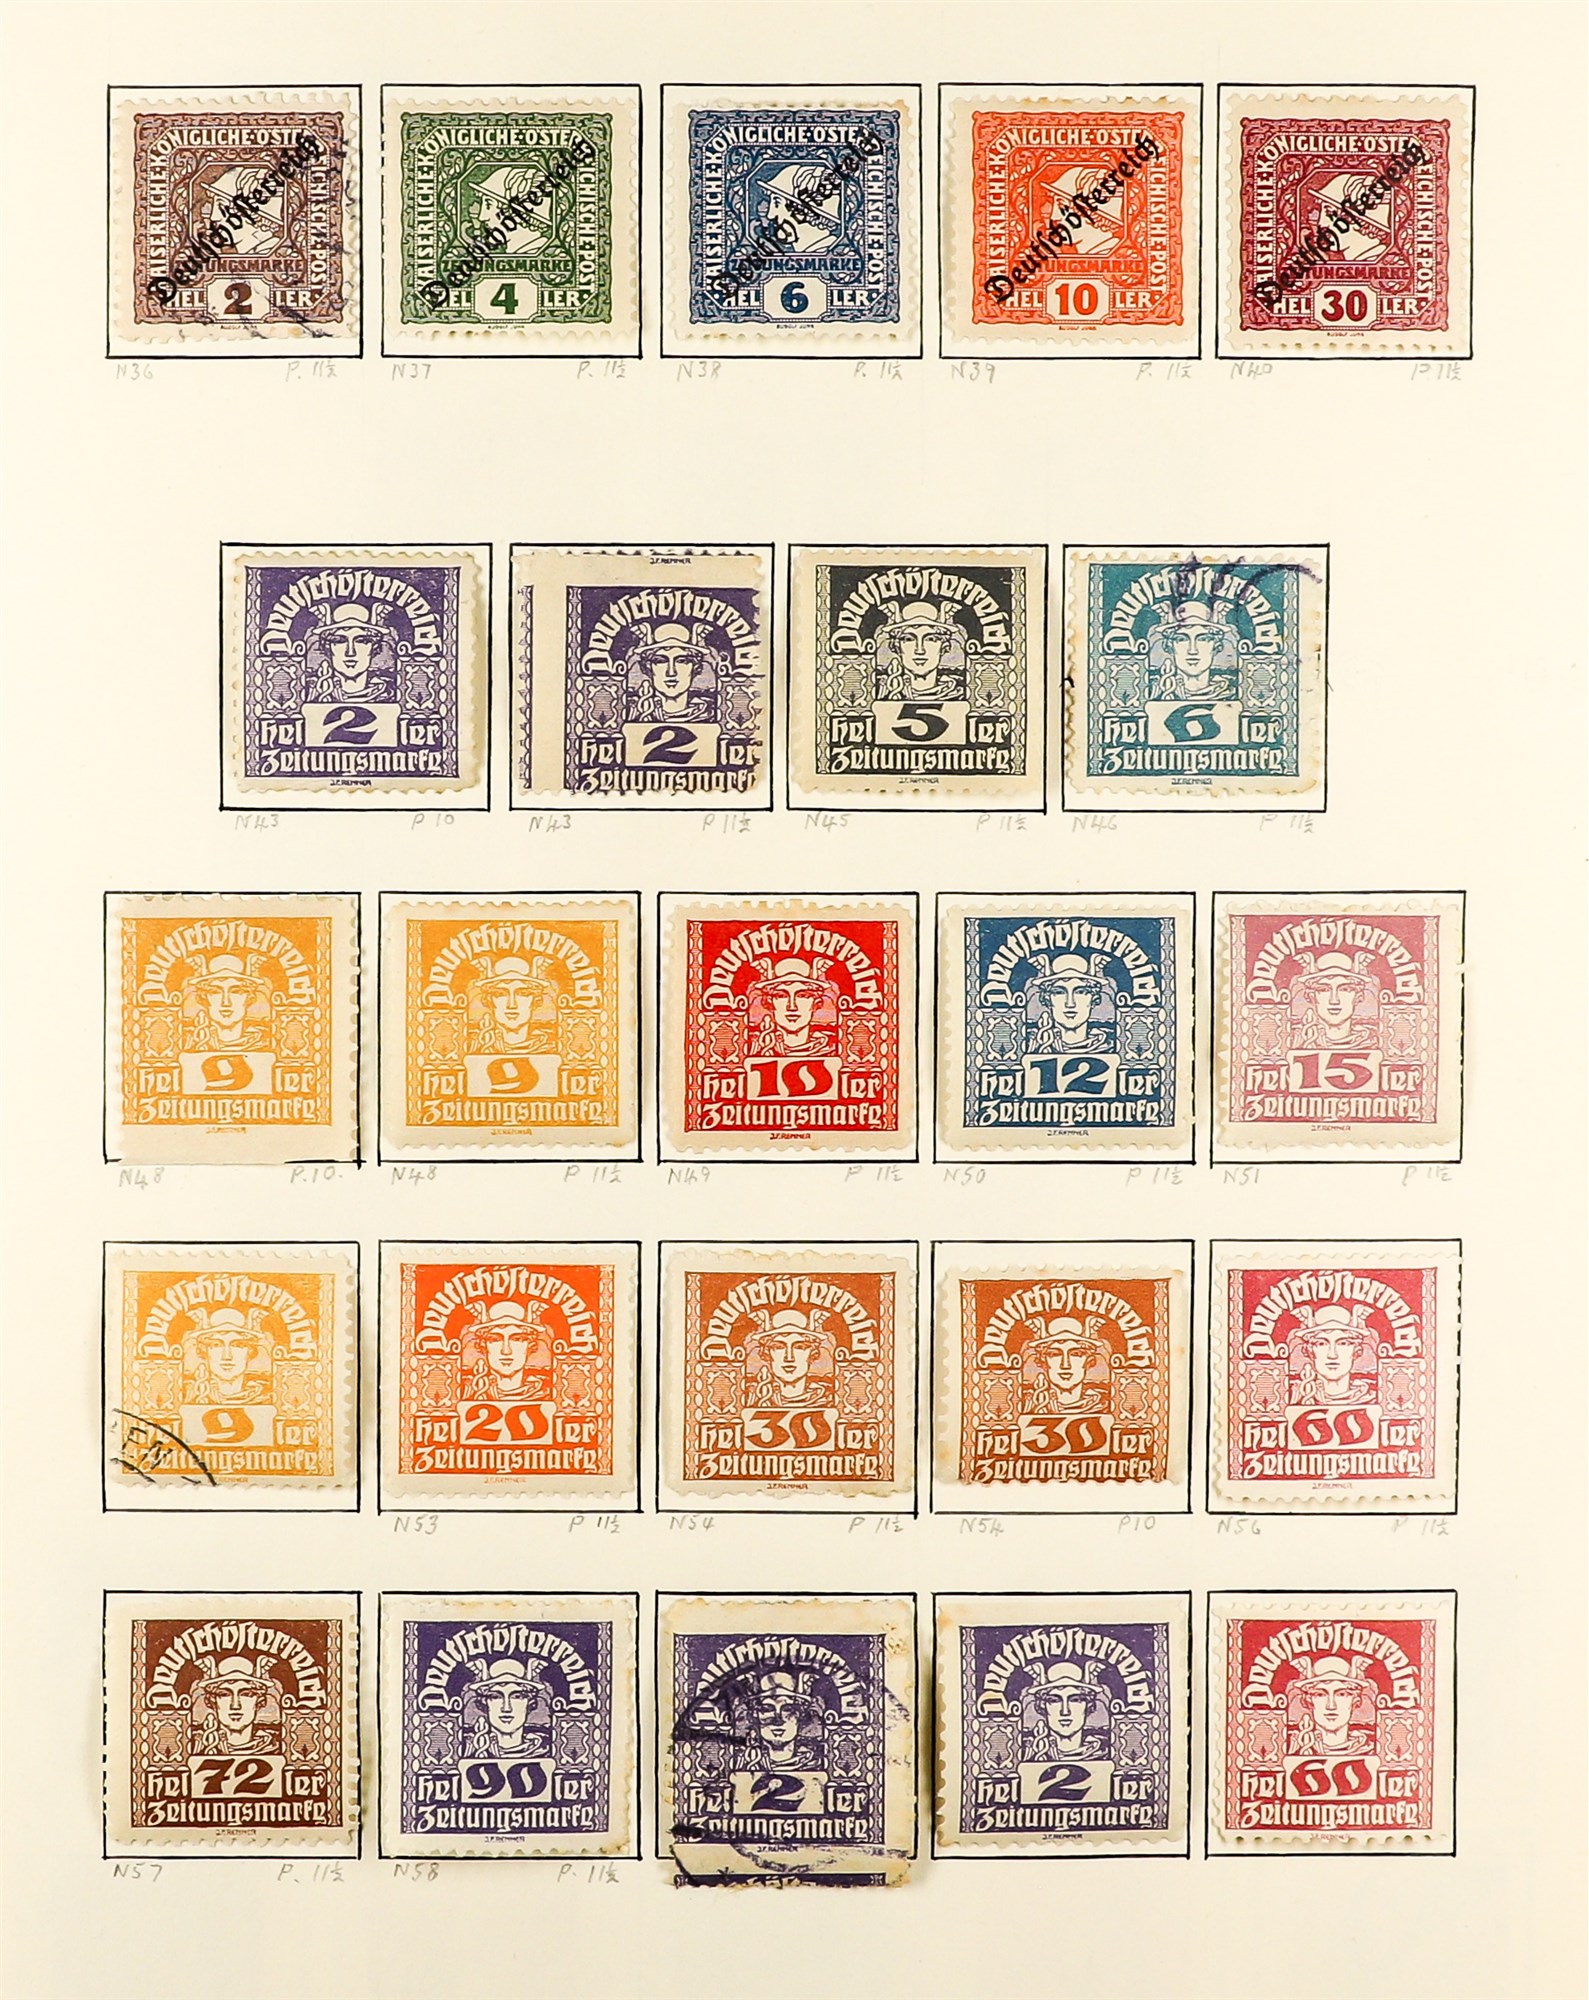 AUSTRIA 1918 - 1937 REPUBLIC COLLECTION of chiefly mint / never hinged mint sets in album incl - Image 14 of 22